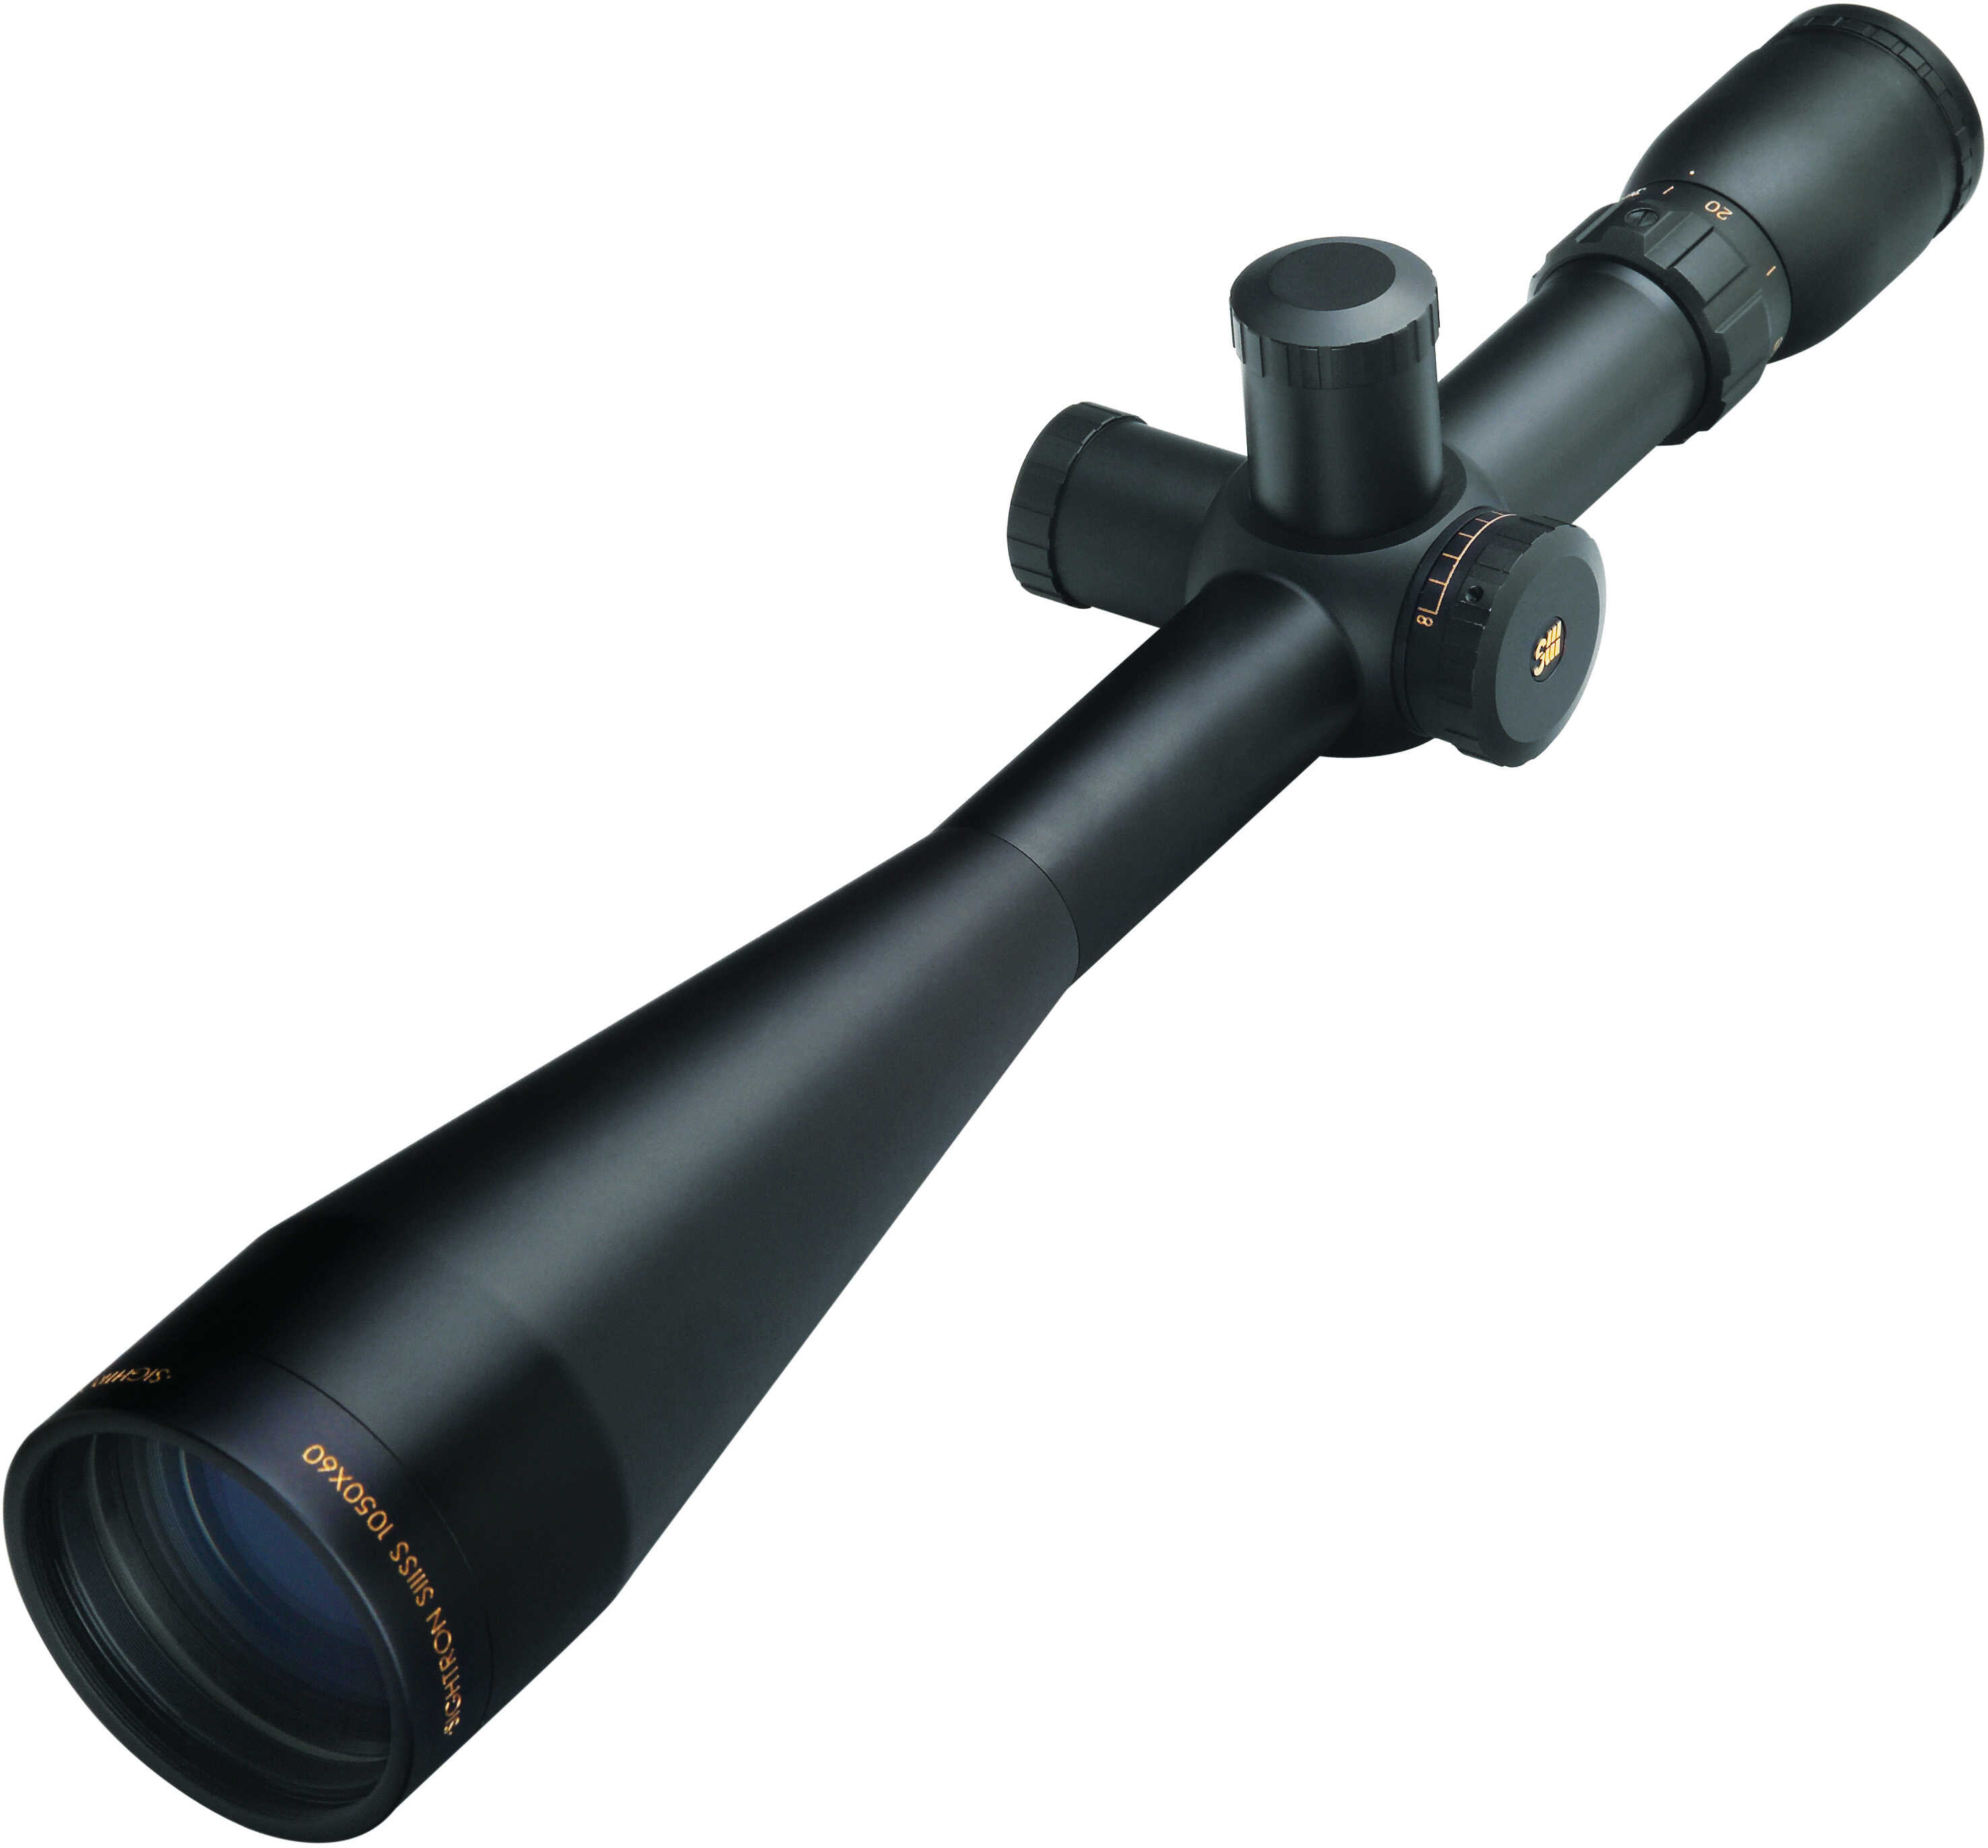 Sightron SIIISS LR Rifle Scope 10-50X60mm 30mm Tube .1 MOA Target Dot Reticle 1/10 MOA Adjustments Second Focal Plane Bl